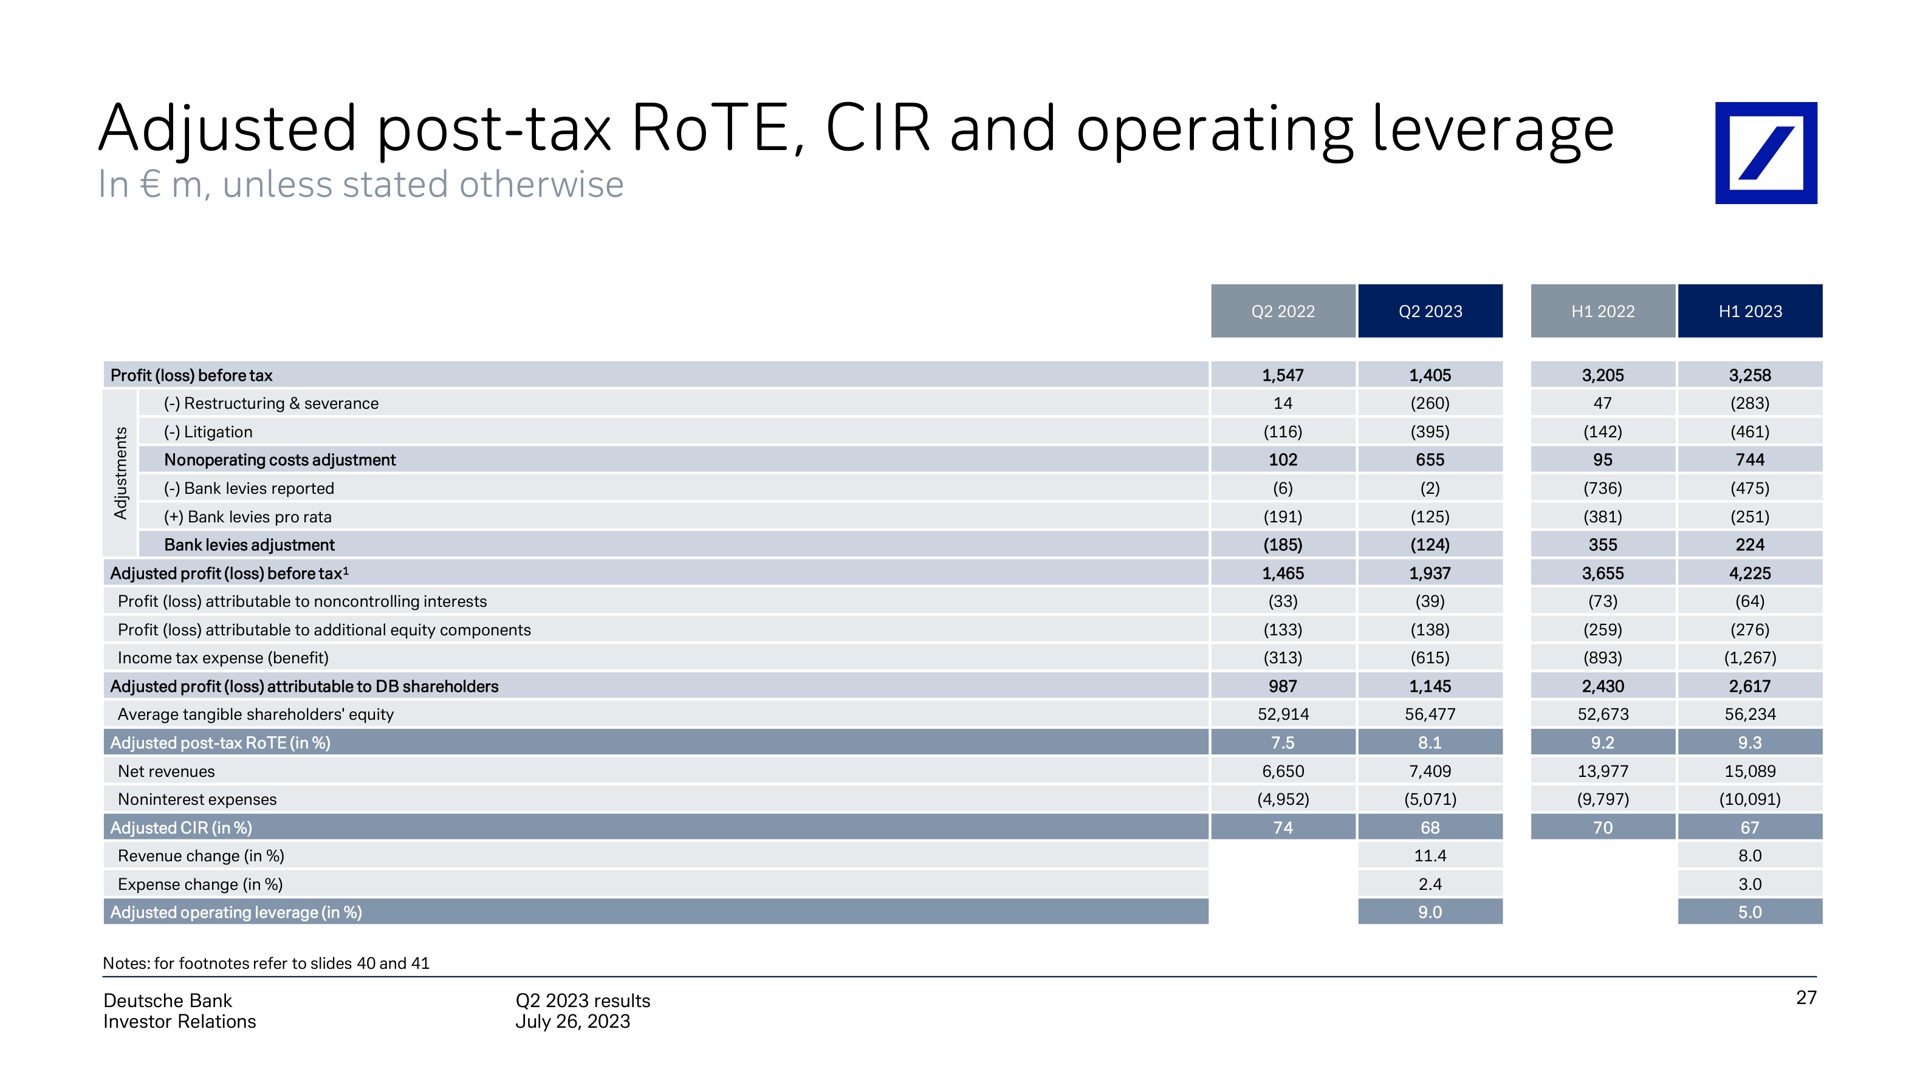 adjusted post tax rote and operating leverage | Deutsche Bank